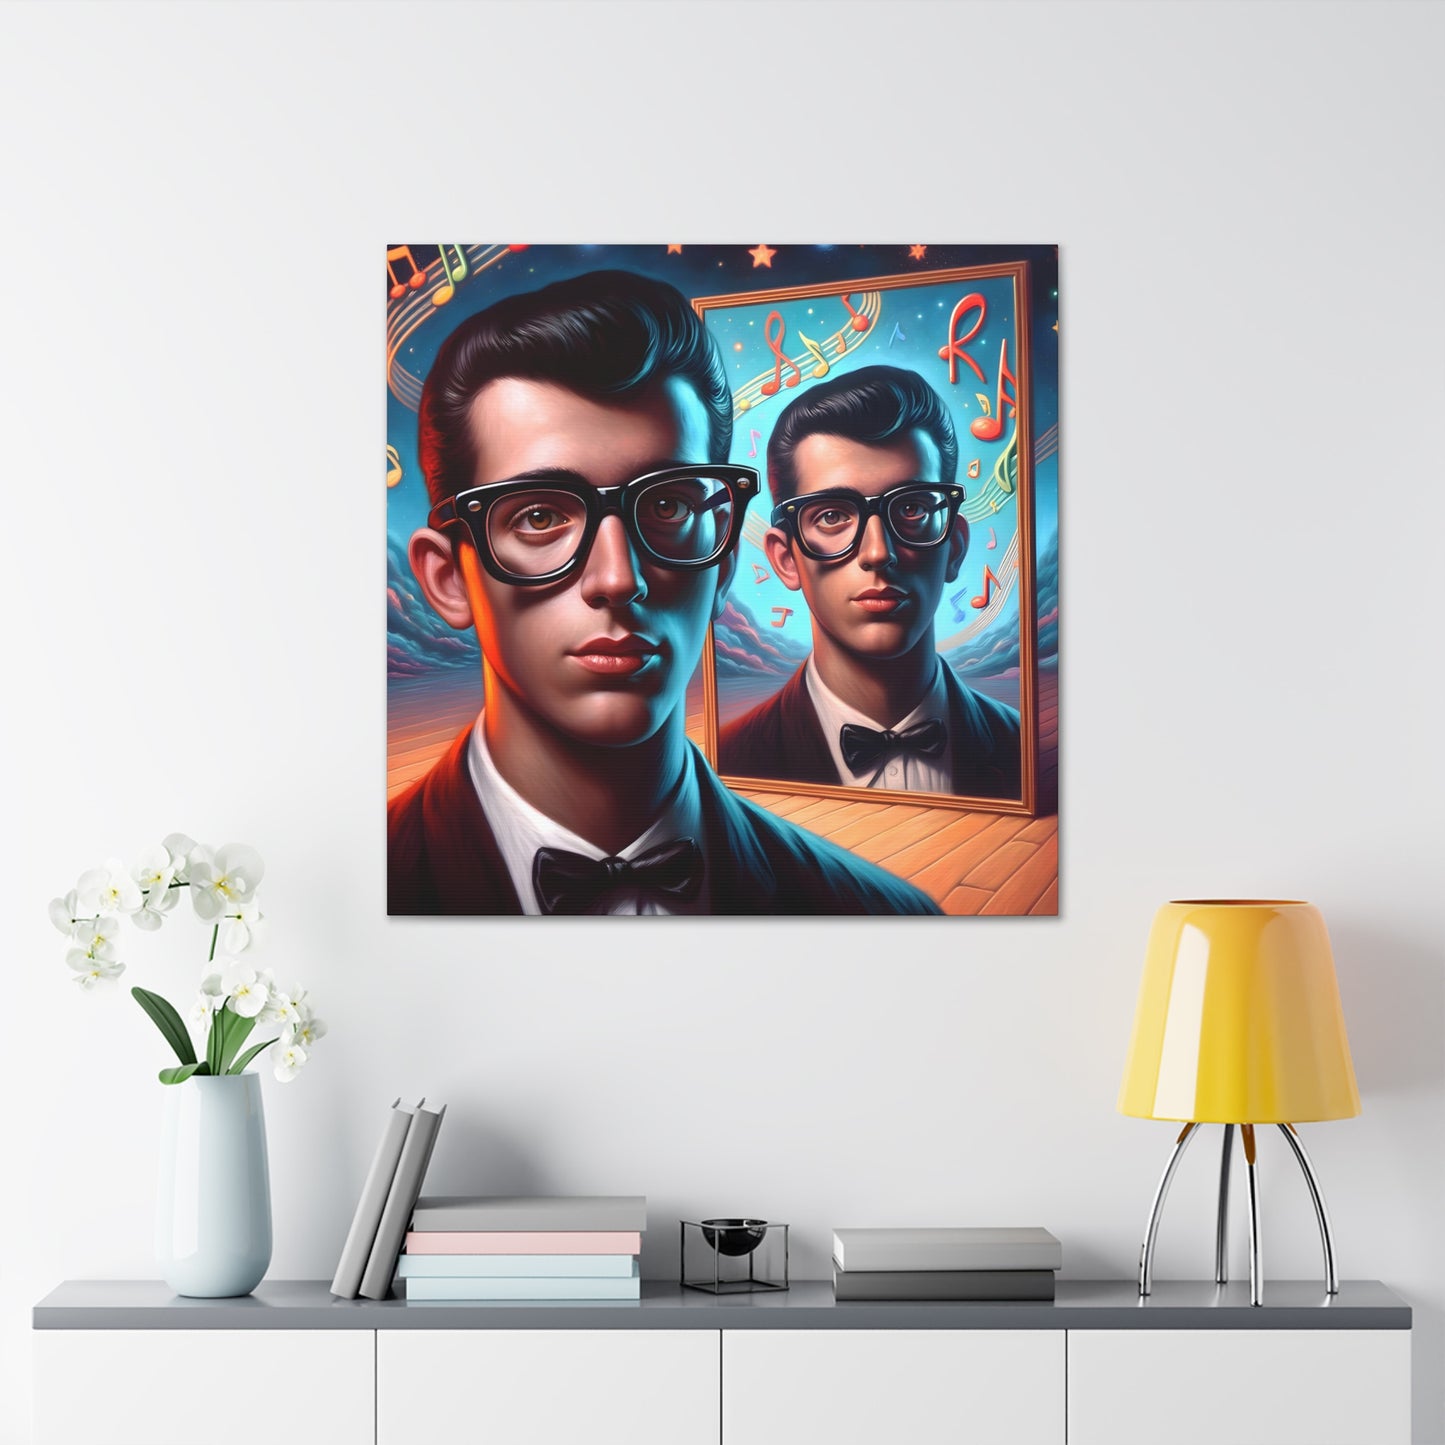 in situ with desk Vibrant retro-inspired artwork capturing the essence of the 1950s rock and roll era. Features a cool vintage figure with slick hair and thick-rimmed glasses, gazing into a mirror that reflects a dreamy, music-filled cosmos with musical notes and celestial bodies. Warm color palette with twilight blues, depicting an intimate yet imaginative scene reminiscent of vinyl and jukeboxes.